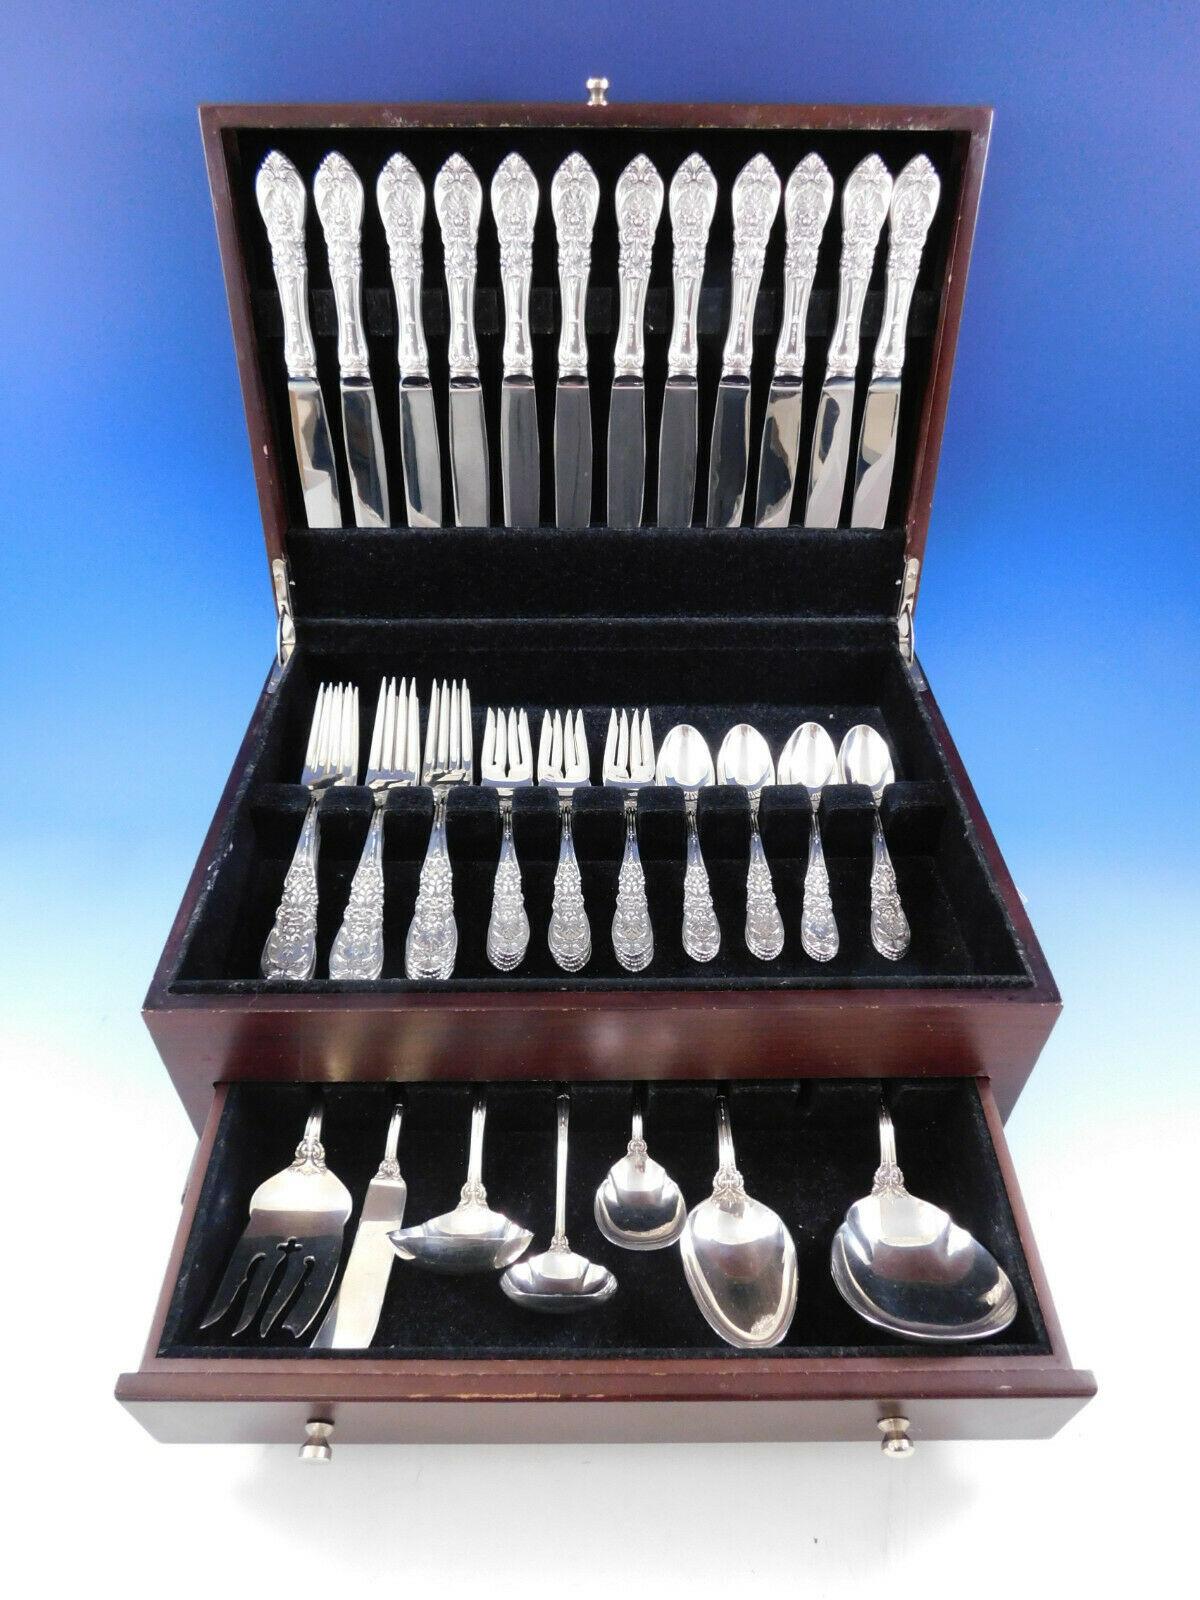 Dinner size Richelieu by International Sterling Silver flatware set, 56 pieces. This set includes:

12 dinner size knives, 9 5/8